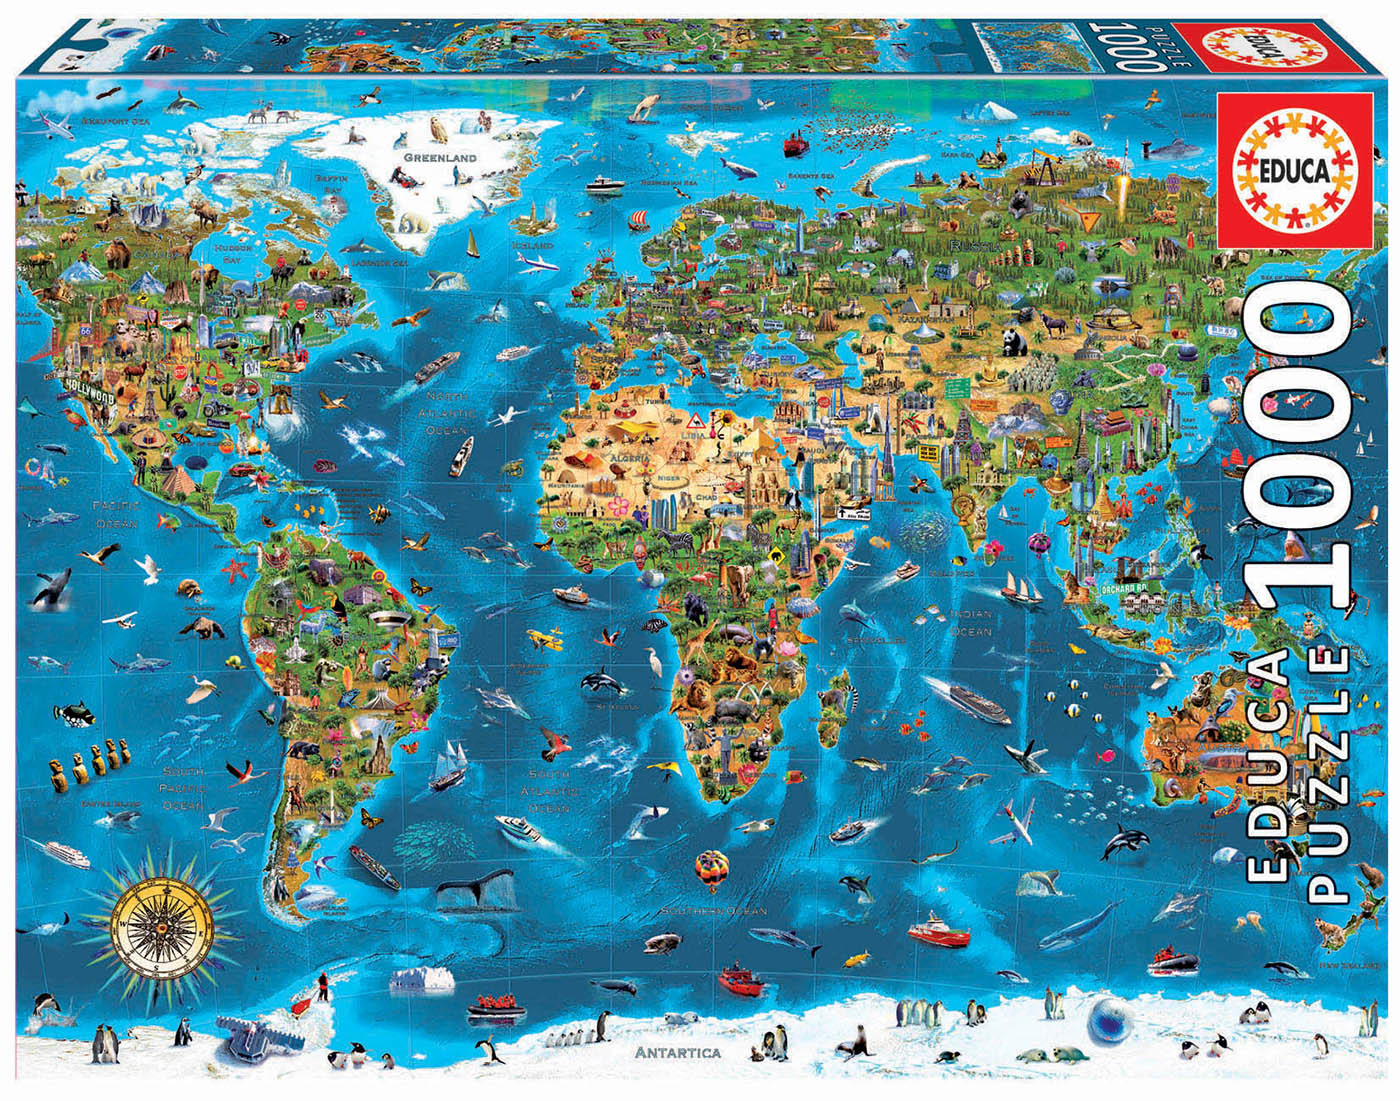 Educa 1000 Wonders of the World - puzzle of 1000 pieces